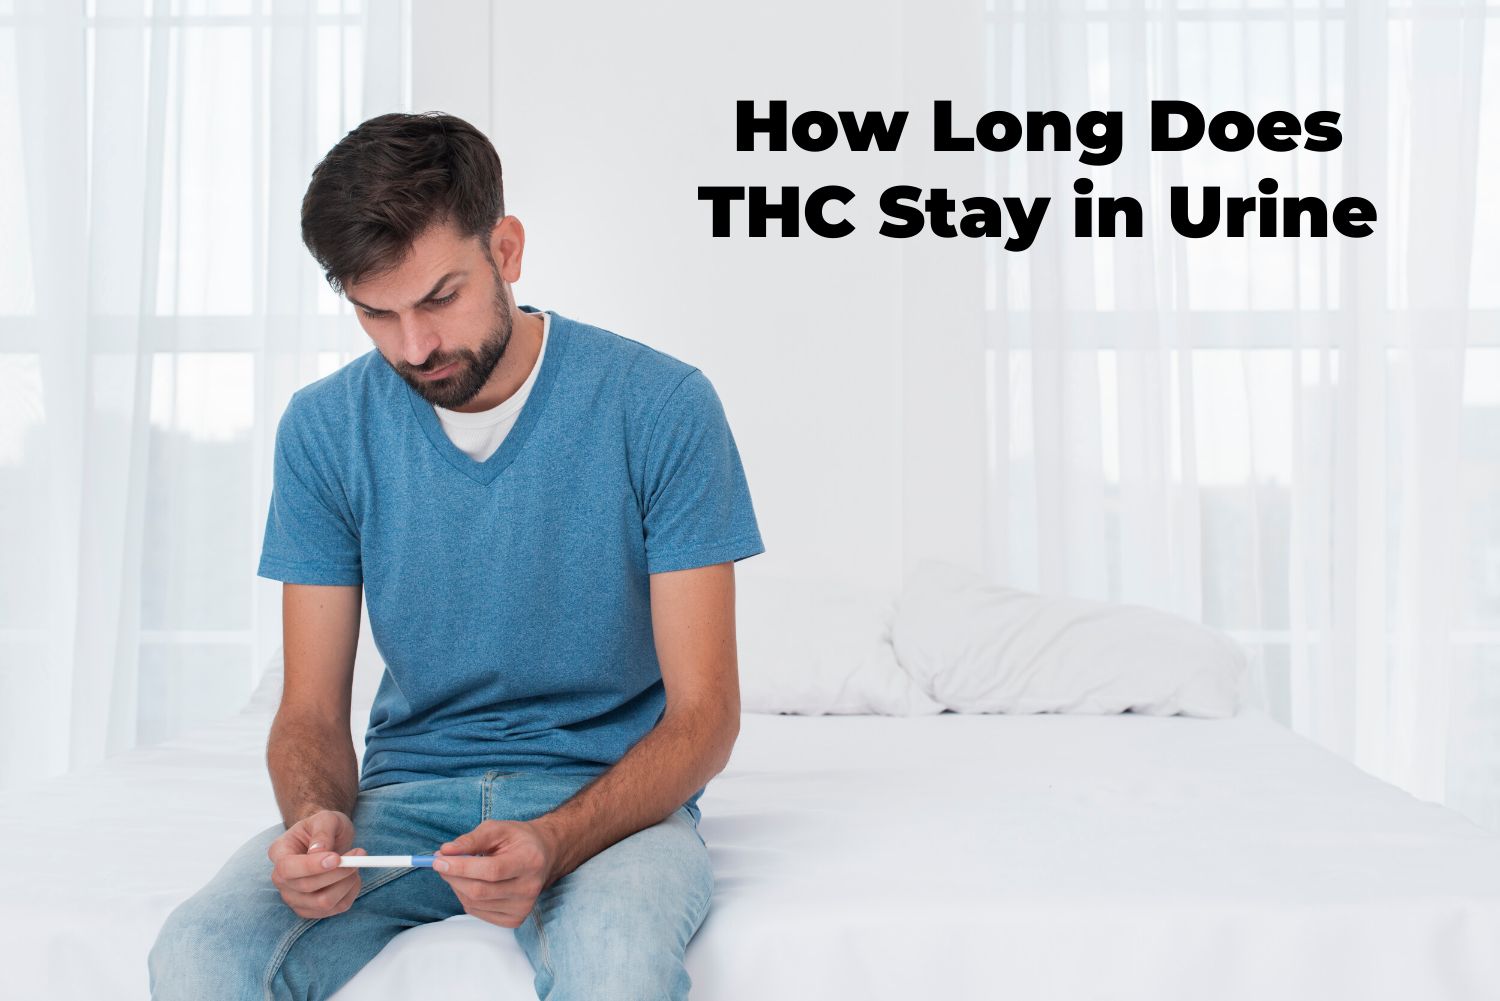 How Long Does THC Stay in Urine